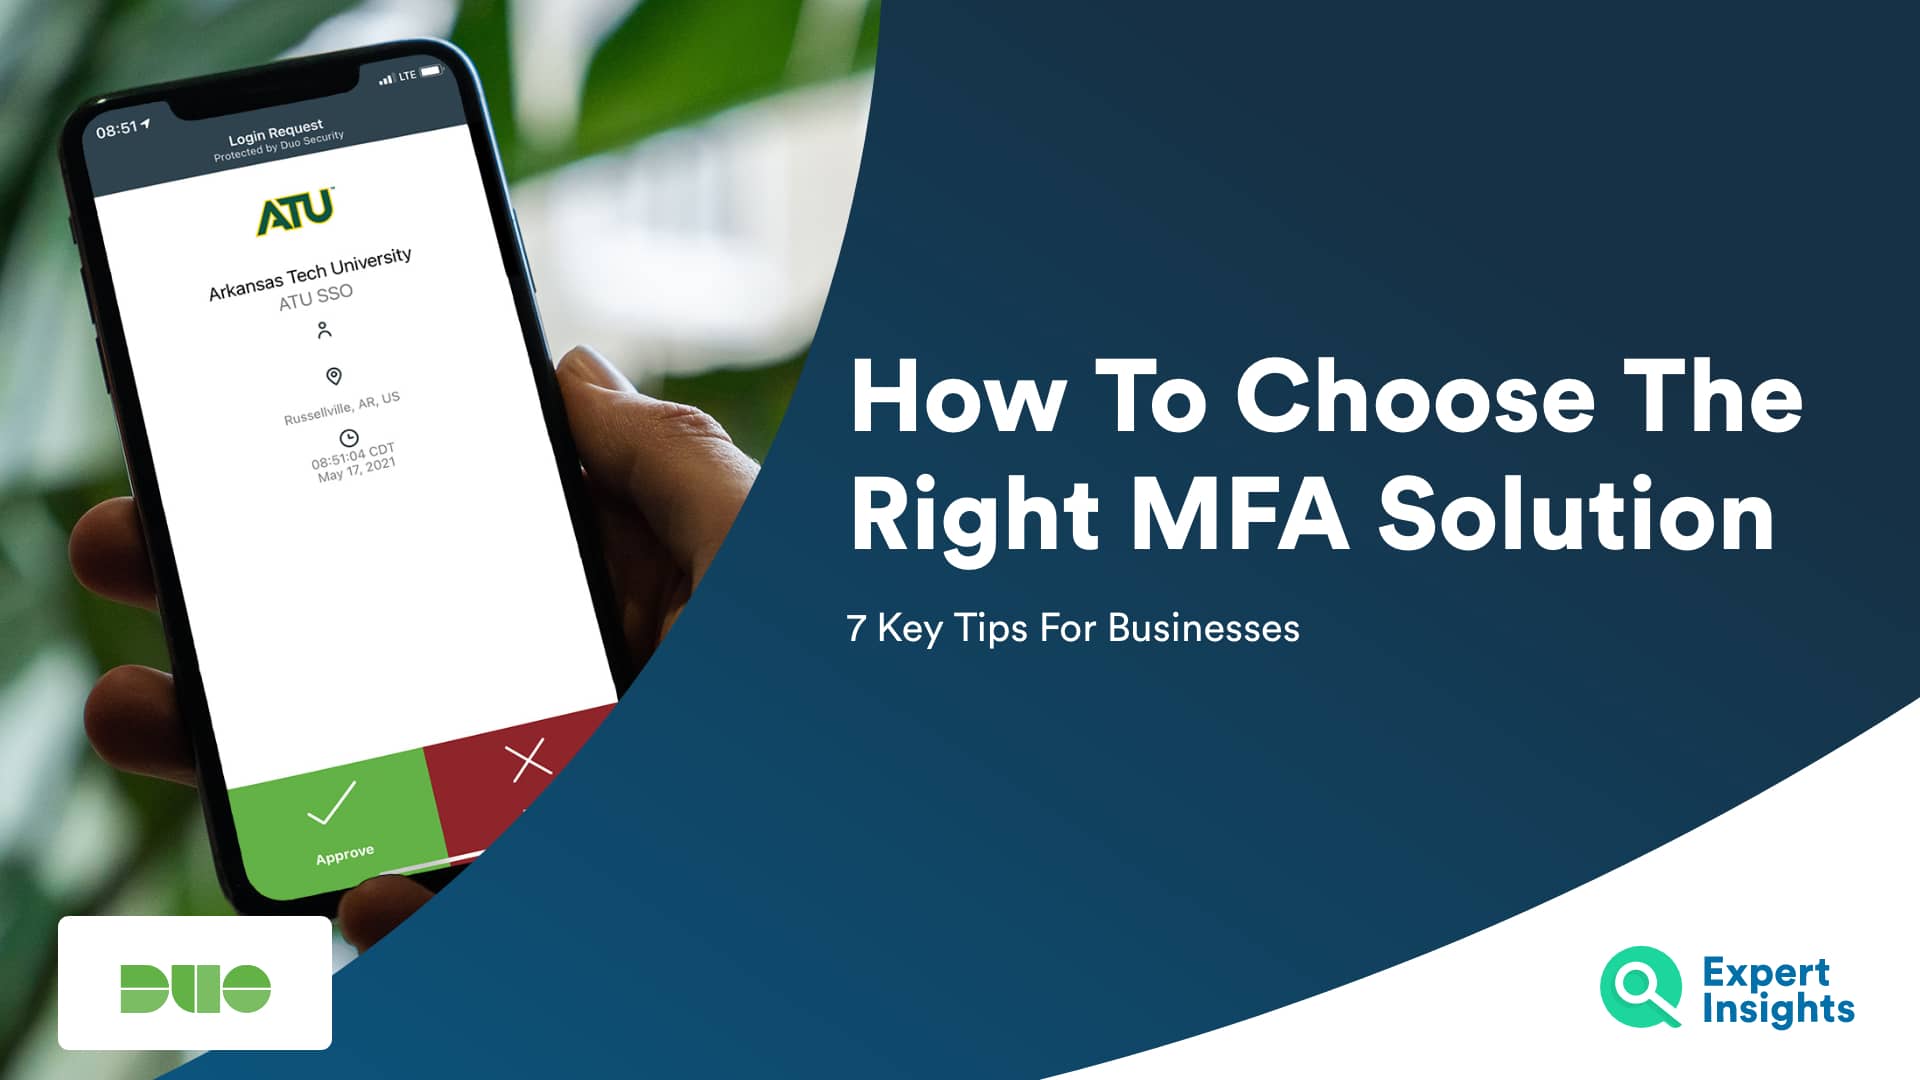 7 Tips For Choosing The Right Multi-Factor Authentication (MFA) Solution